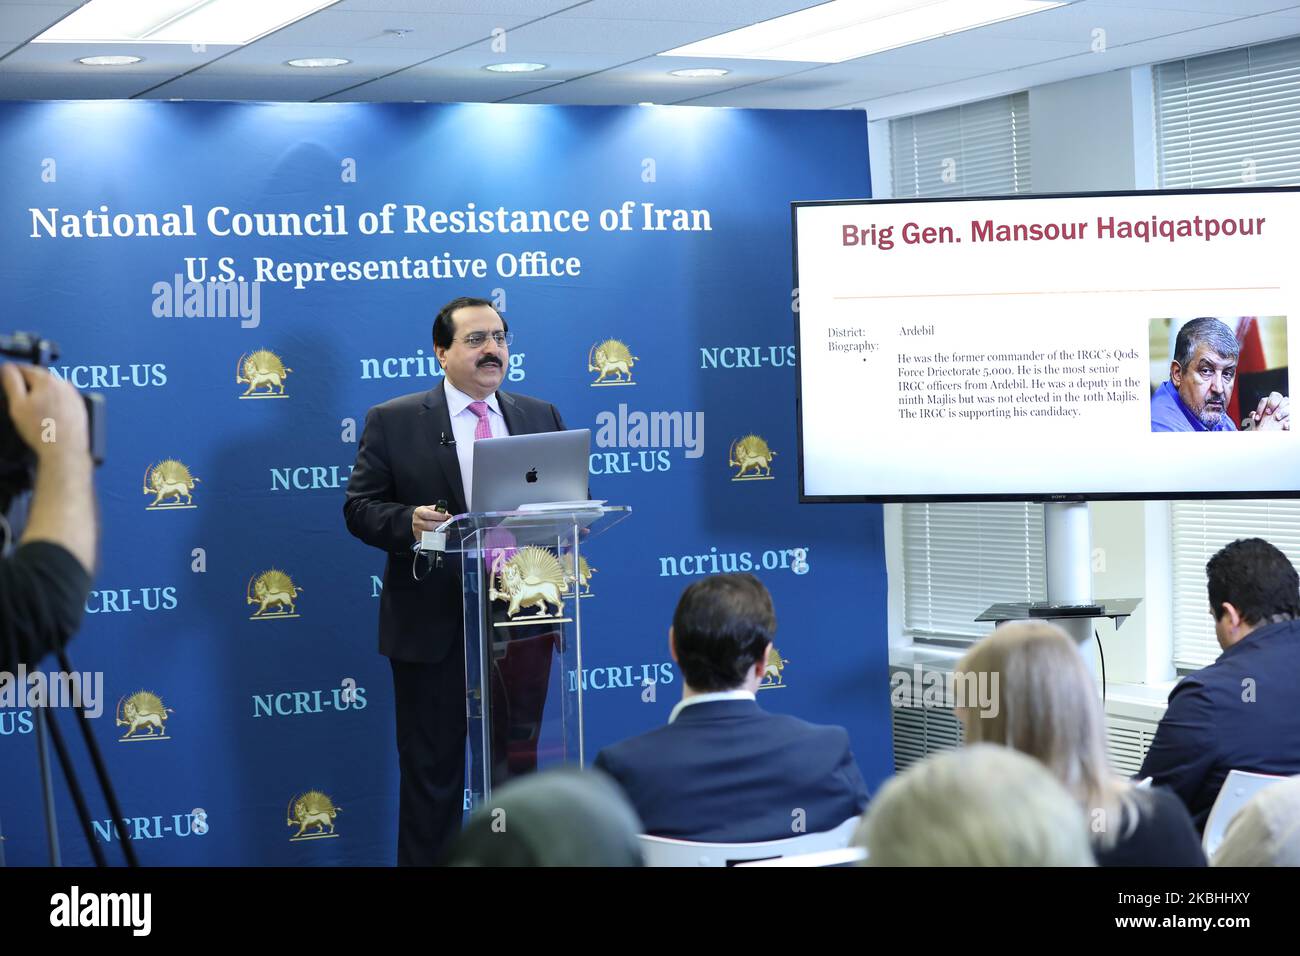 Alireza Jafarzadeh, Washington DC, US, 20/02/2020 -NCRI-US, the National Council of Resistance of Iran, Deputy Director Alireza Jafarzadeh at a news conference at NCRI office, in Washington D.C. on February 20, 2020, said the regime is worried that any schism would aggravate its vulnerability in its stand-off with the Iranian people. (Photo by Siavosh Hosseini/NurPhoto) Stock Photo